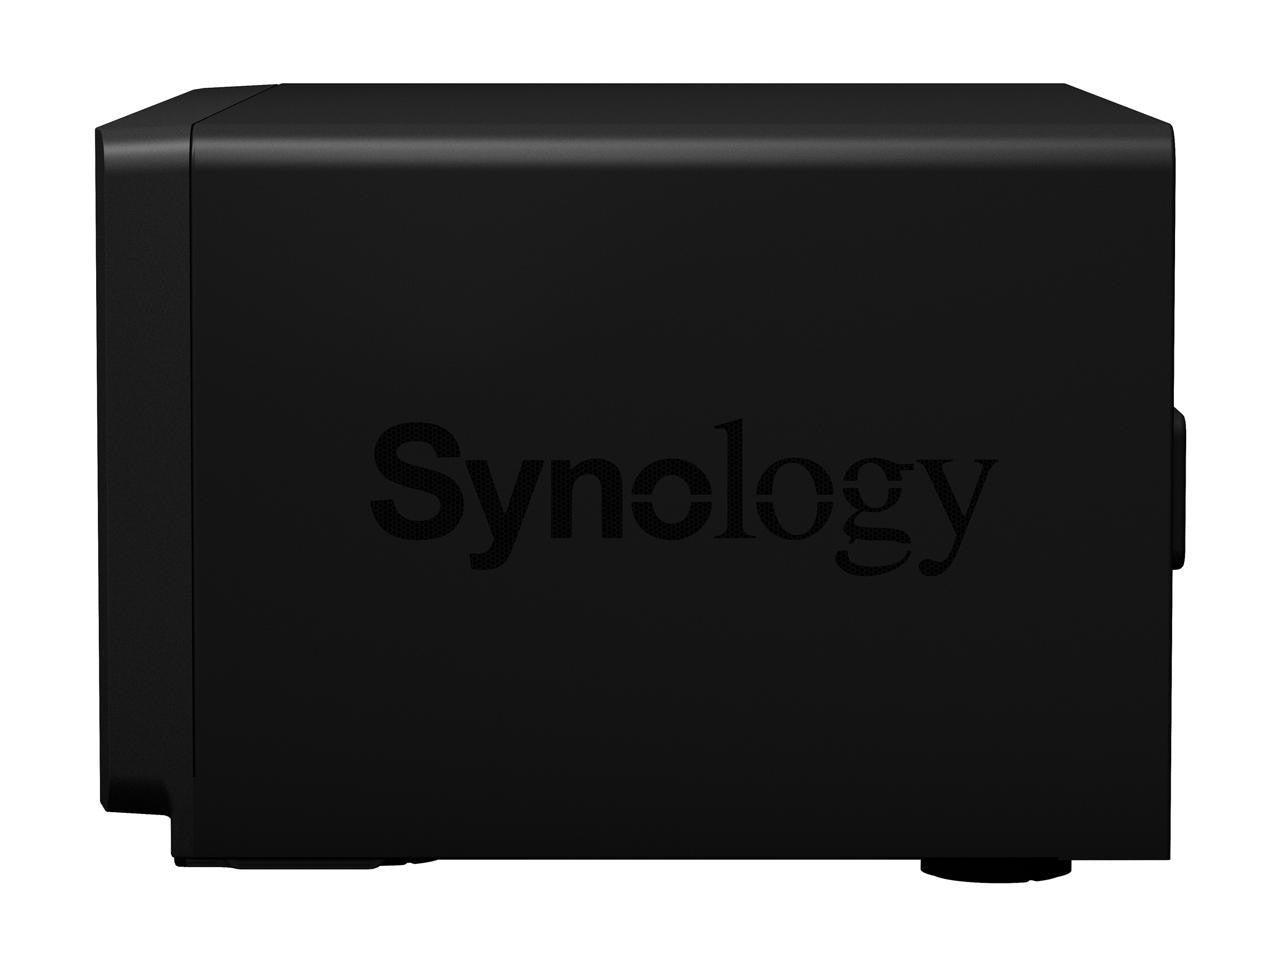 Synology DS1821+ 8-BAY DiskStation with 8GB Synology RAM and 80TB (8x10TB) Western Digital RED PLUS Drives Fully Assembled and Tested